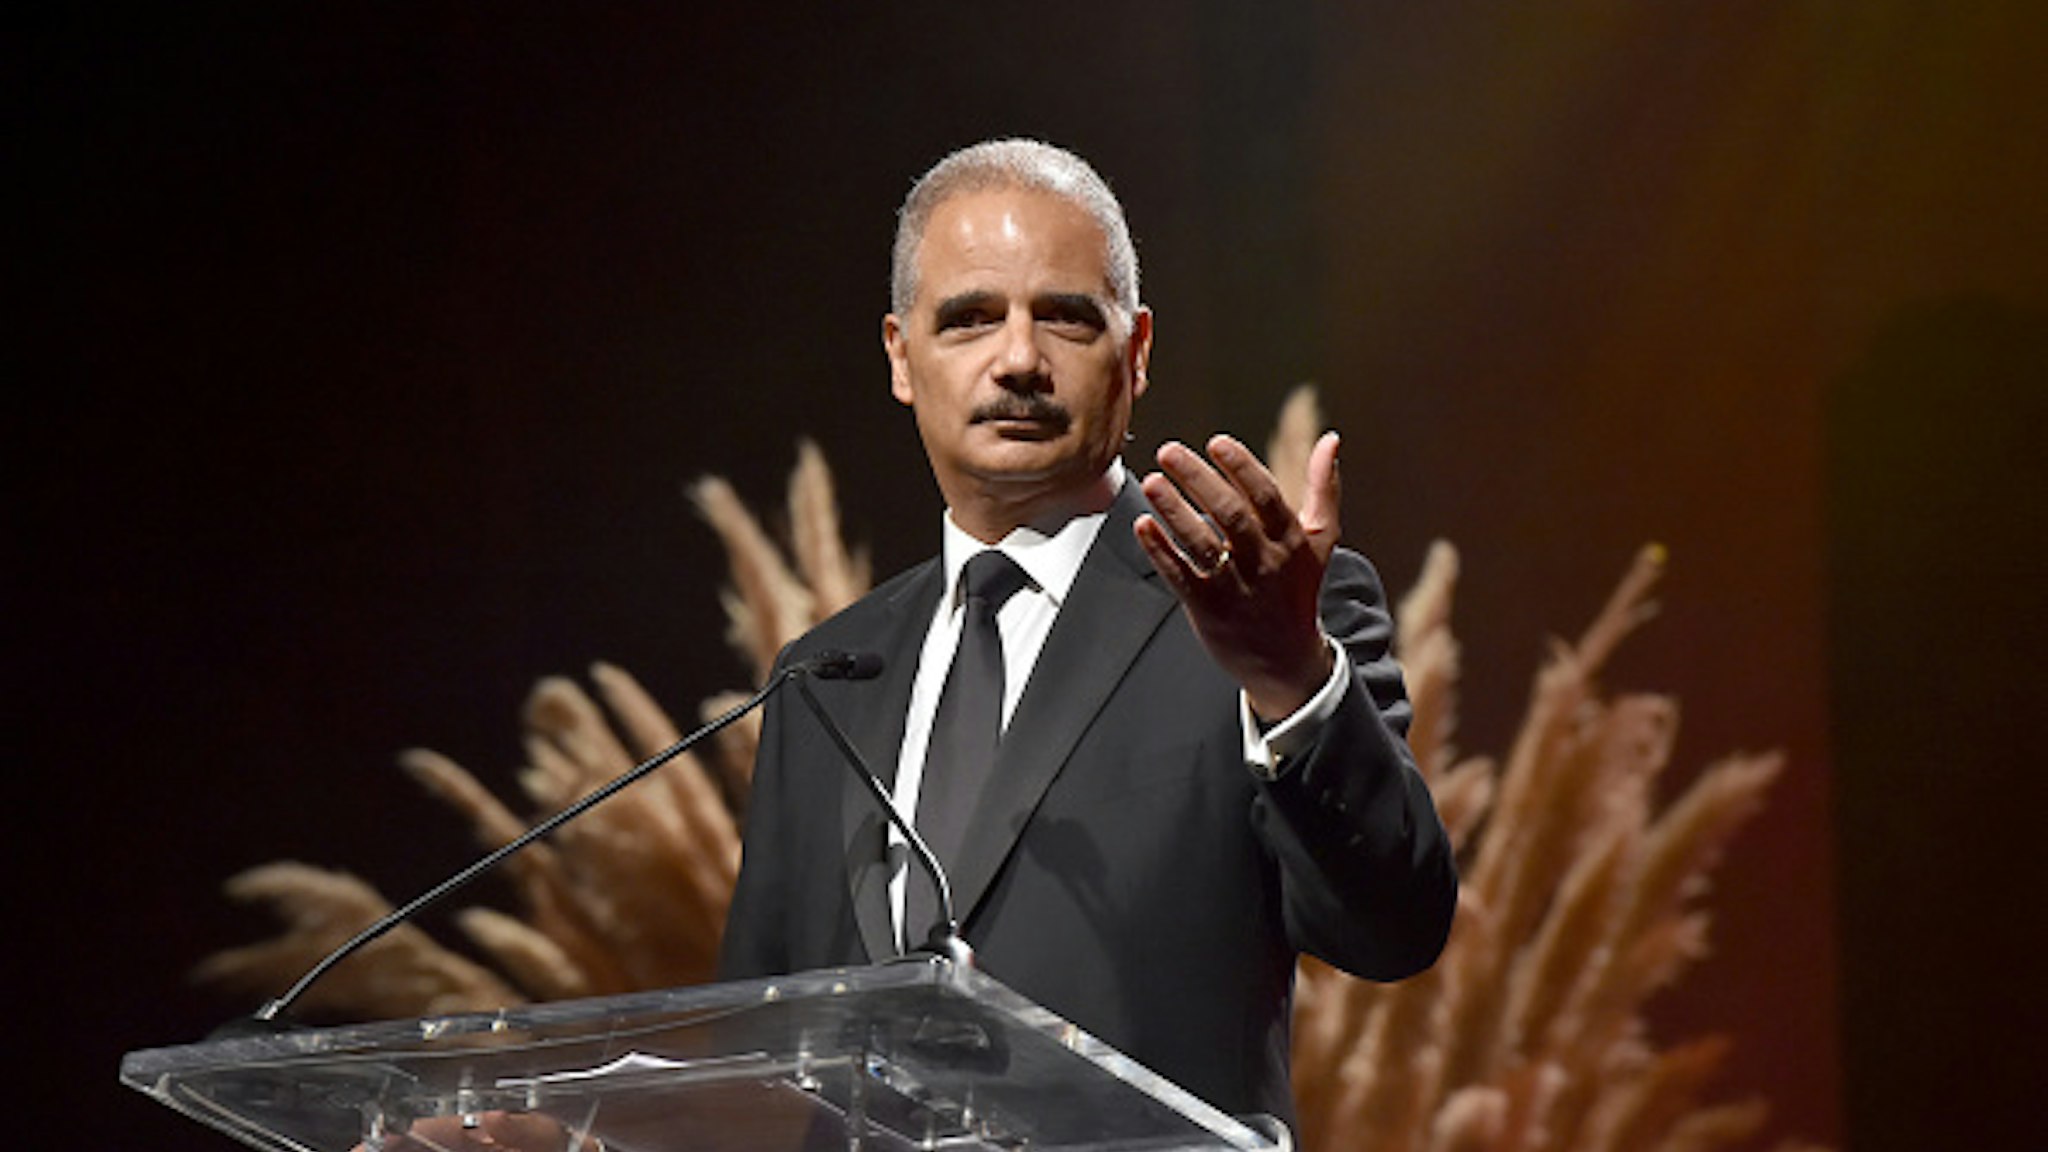 SANTA MONICA, CALIFORNIA - OCTOBER 10: 82nd Attorney General of the U.S. Eric Holder speaks onstage during City Of Hope Spirit Of Life Gala 2019 on October 10, 2019 in Santa Monica, California.